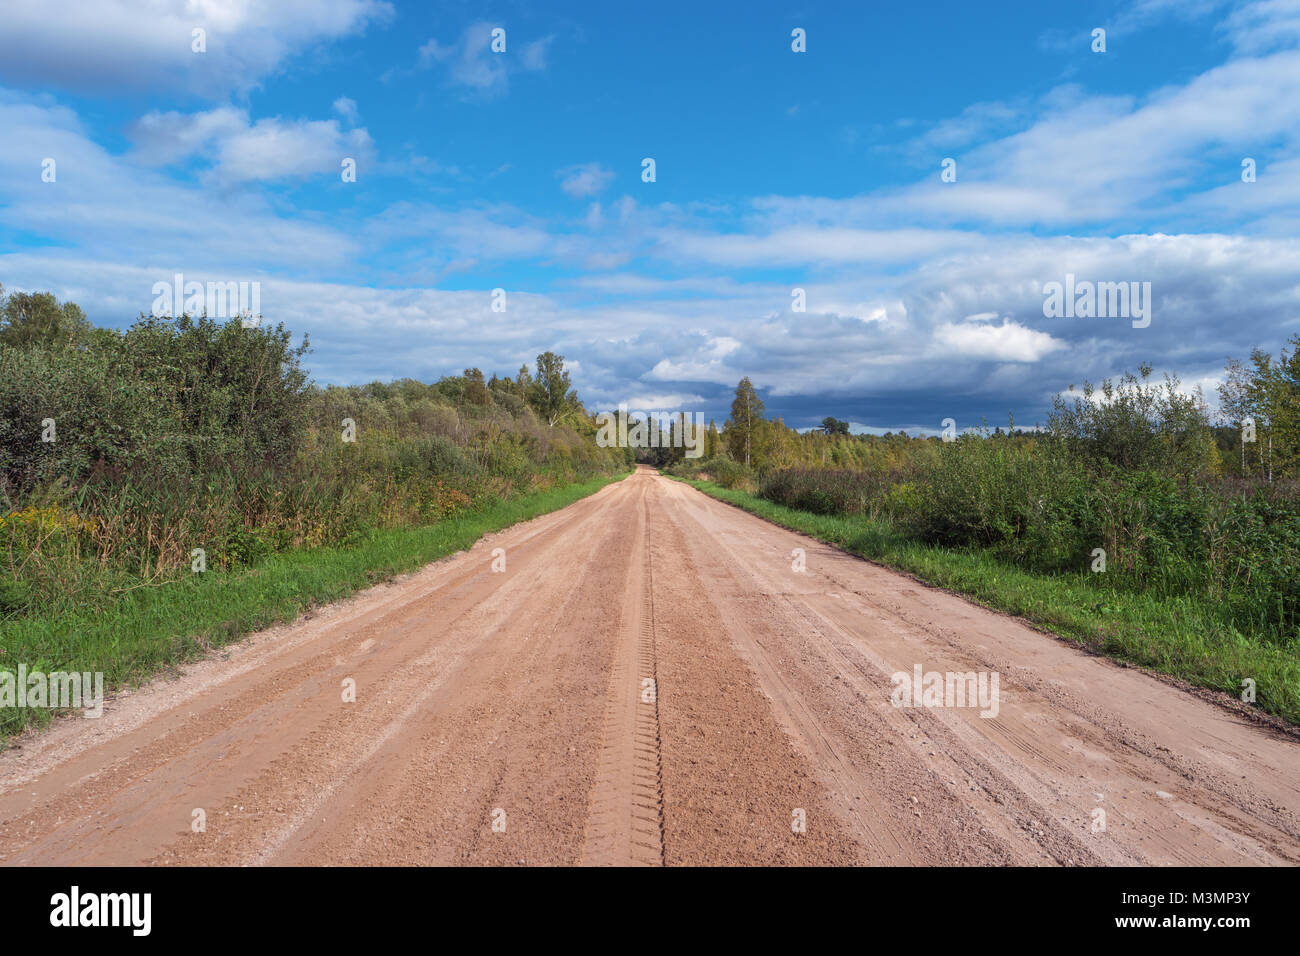 Scenic gravel road in forest. Rural country road. Adventure ecological tourism concept. Beautiful nature. Green trees, grass and blue cloudy sky. Long Stock Photo